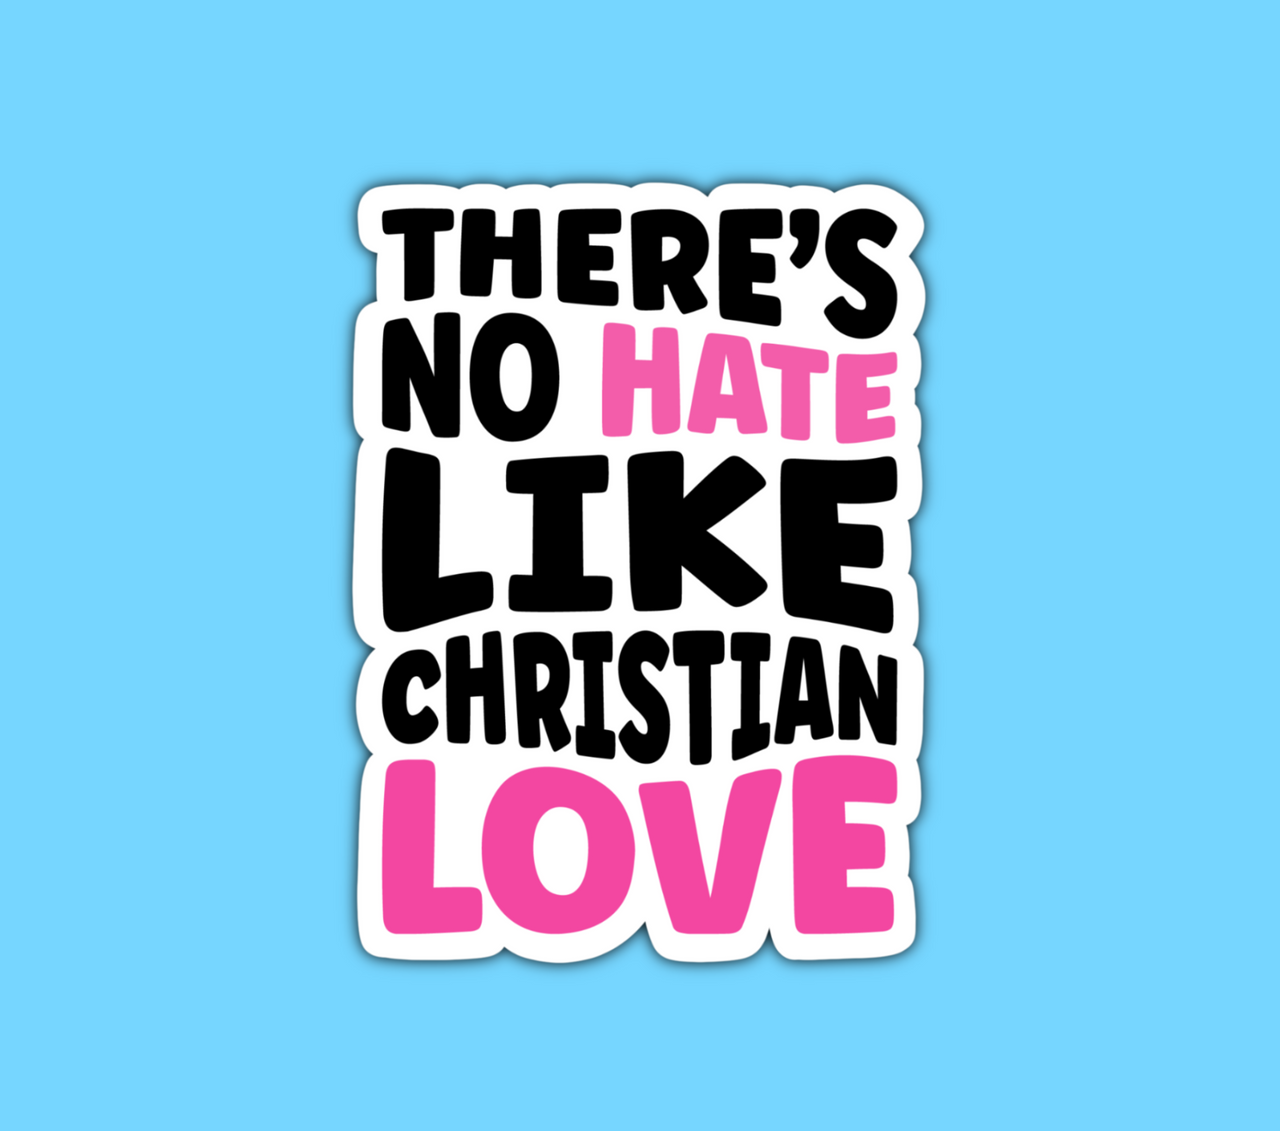 There’s no hate like Christian love